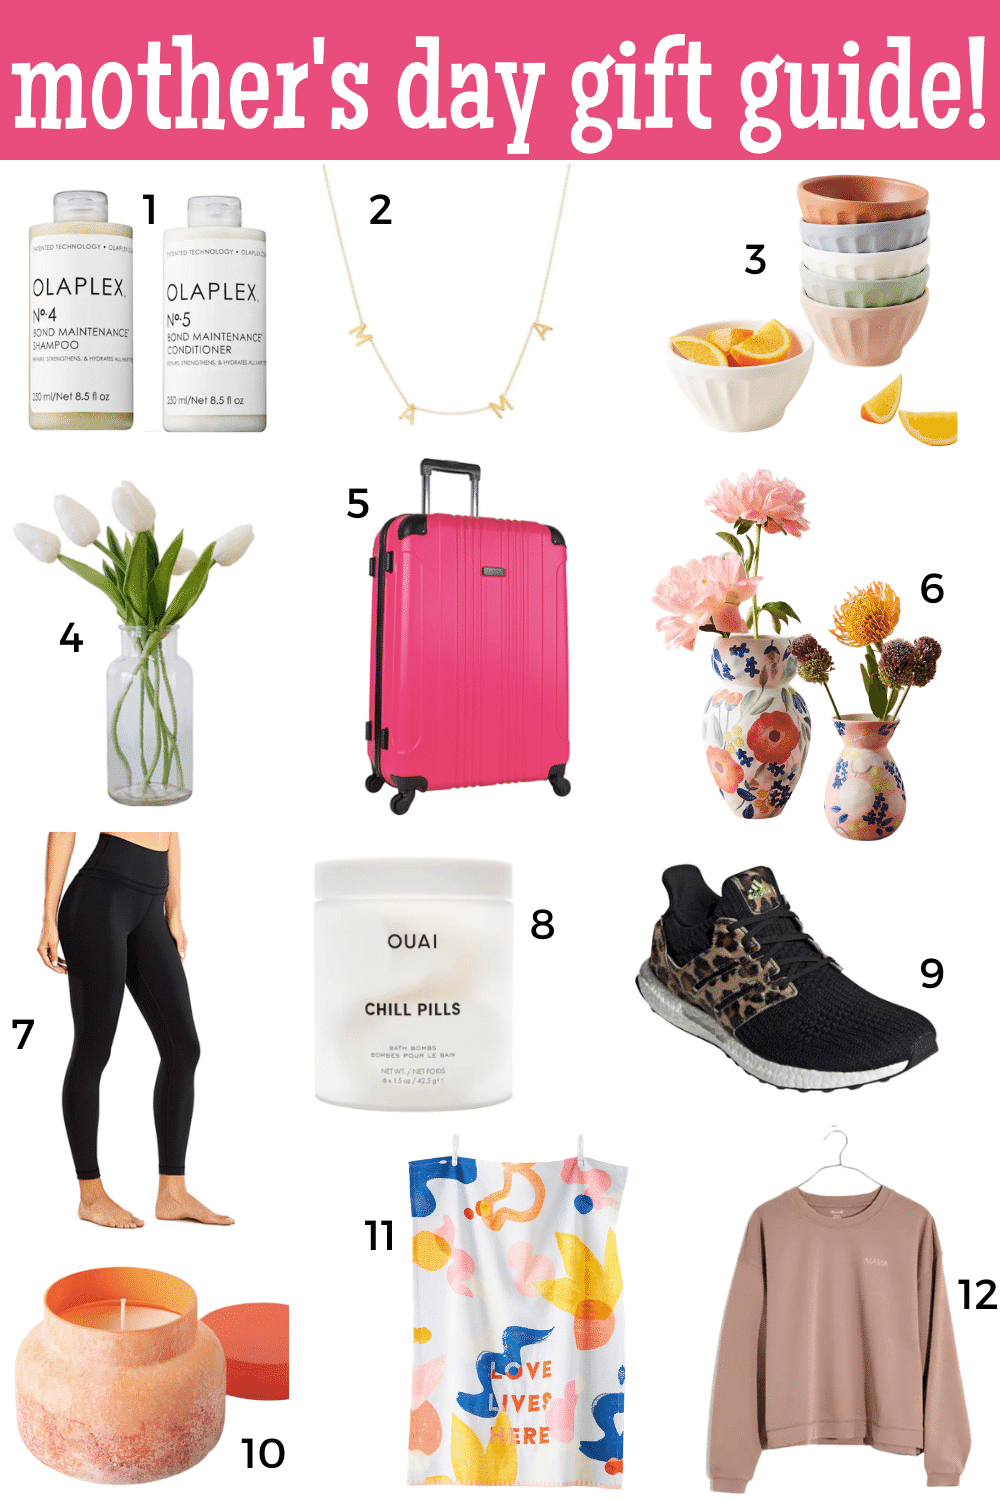 mother's day gift guide 